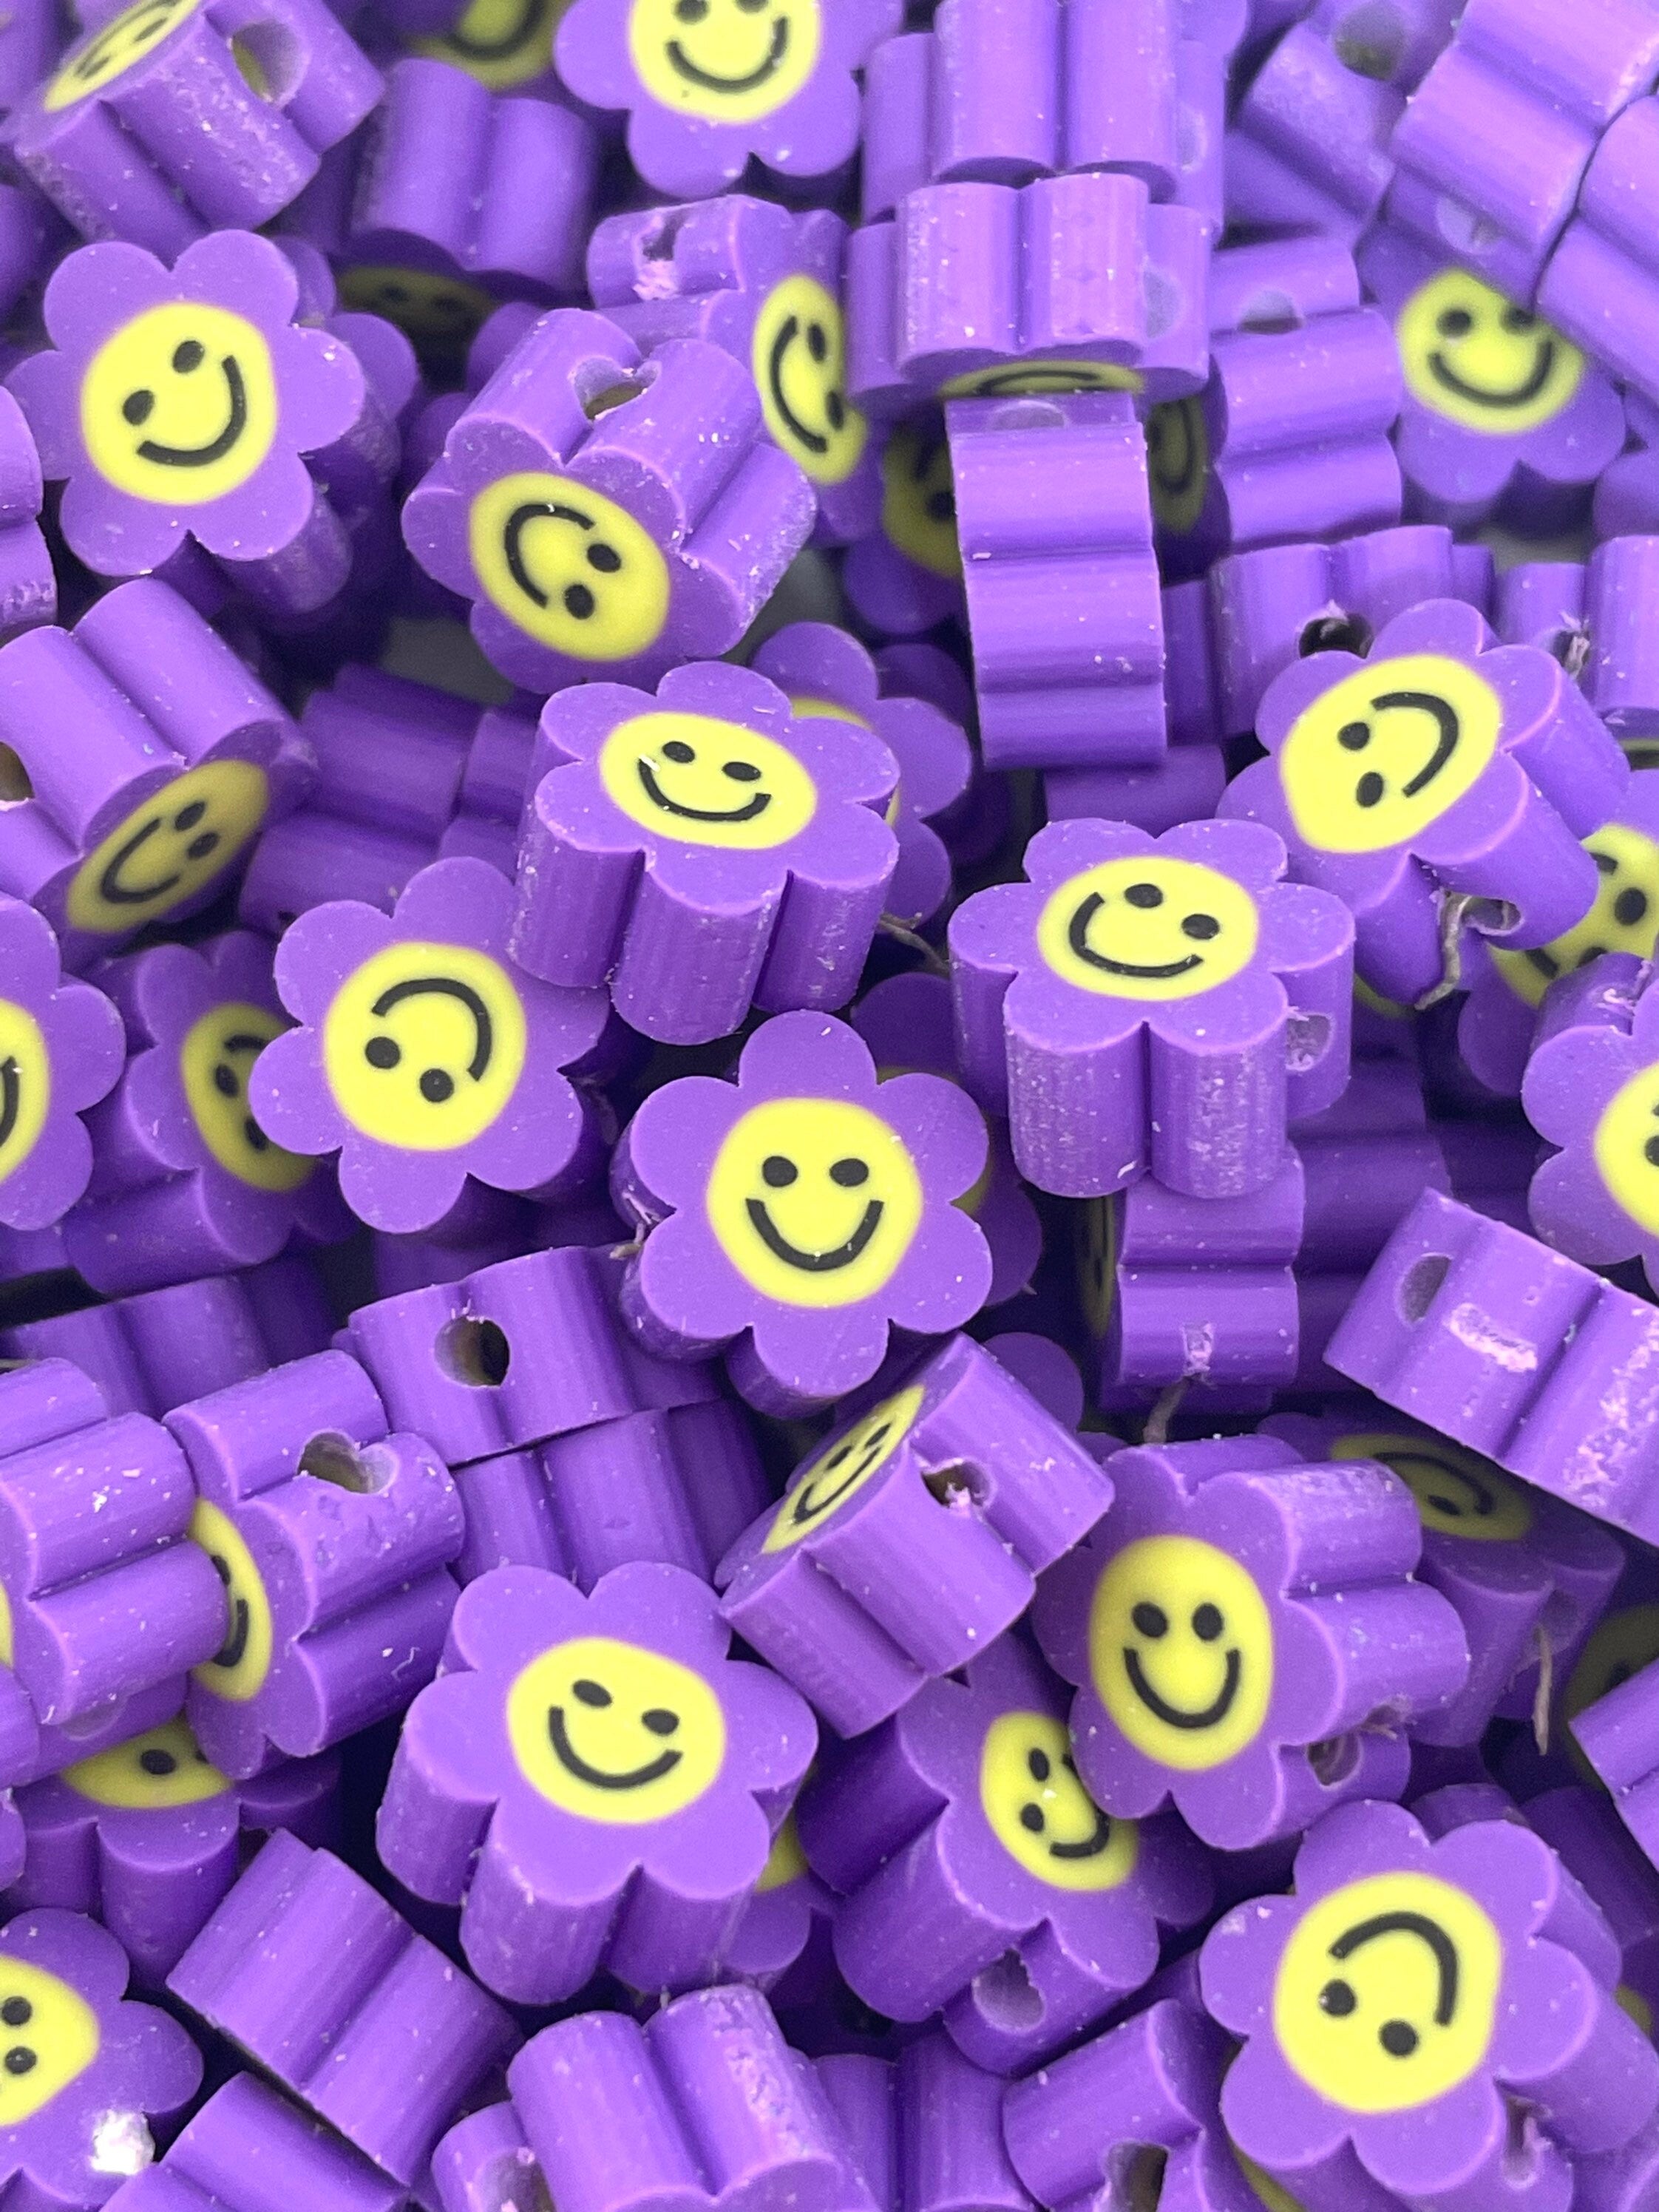 SMOL Flower Beads, Cute Clay Purple Flowers with Faces, Alice and